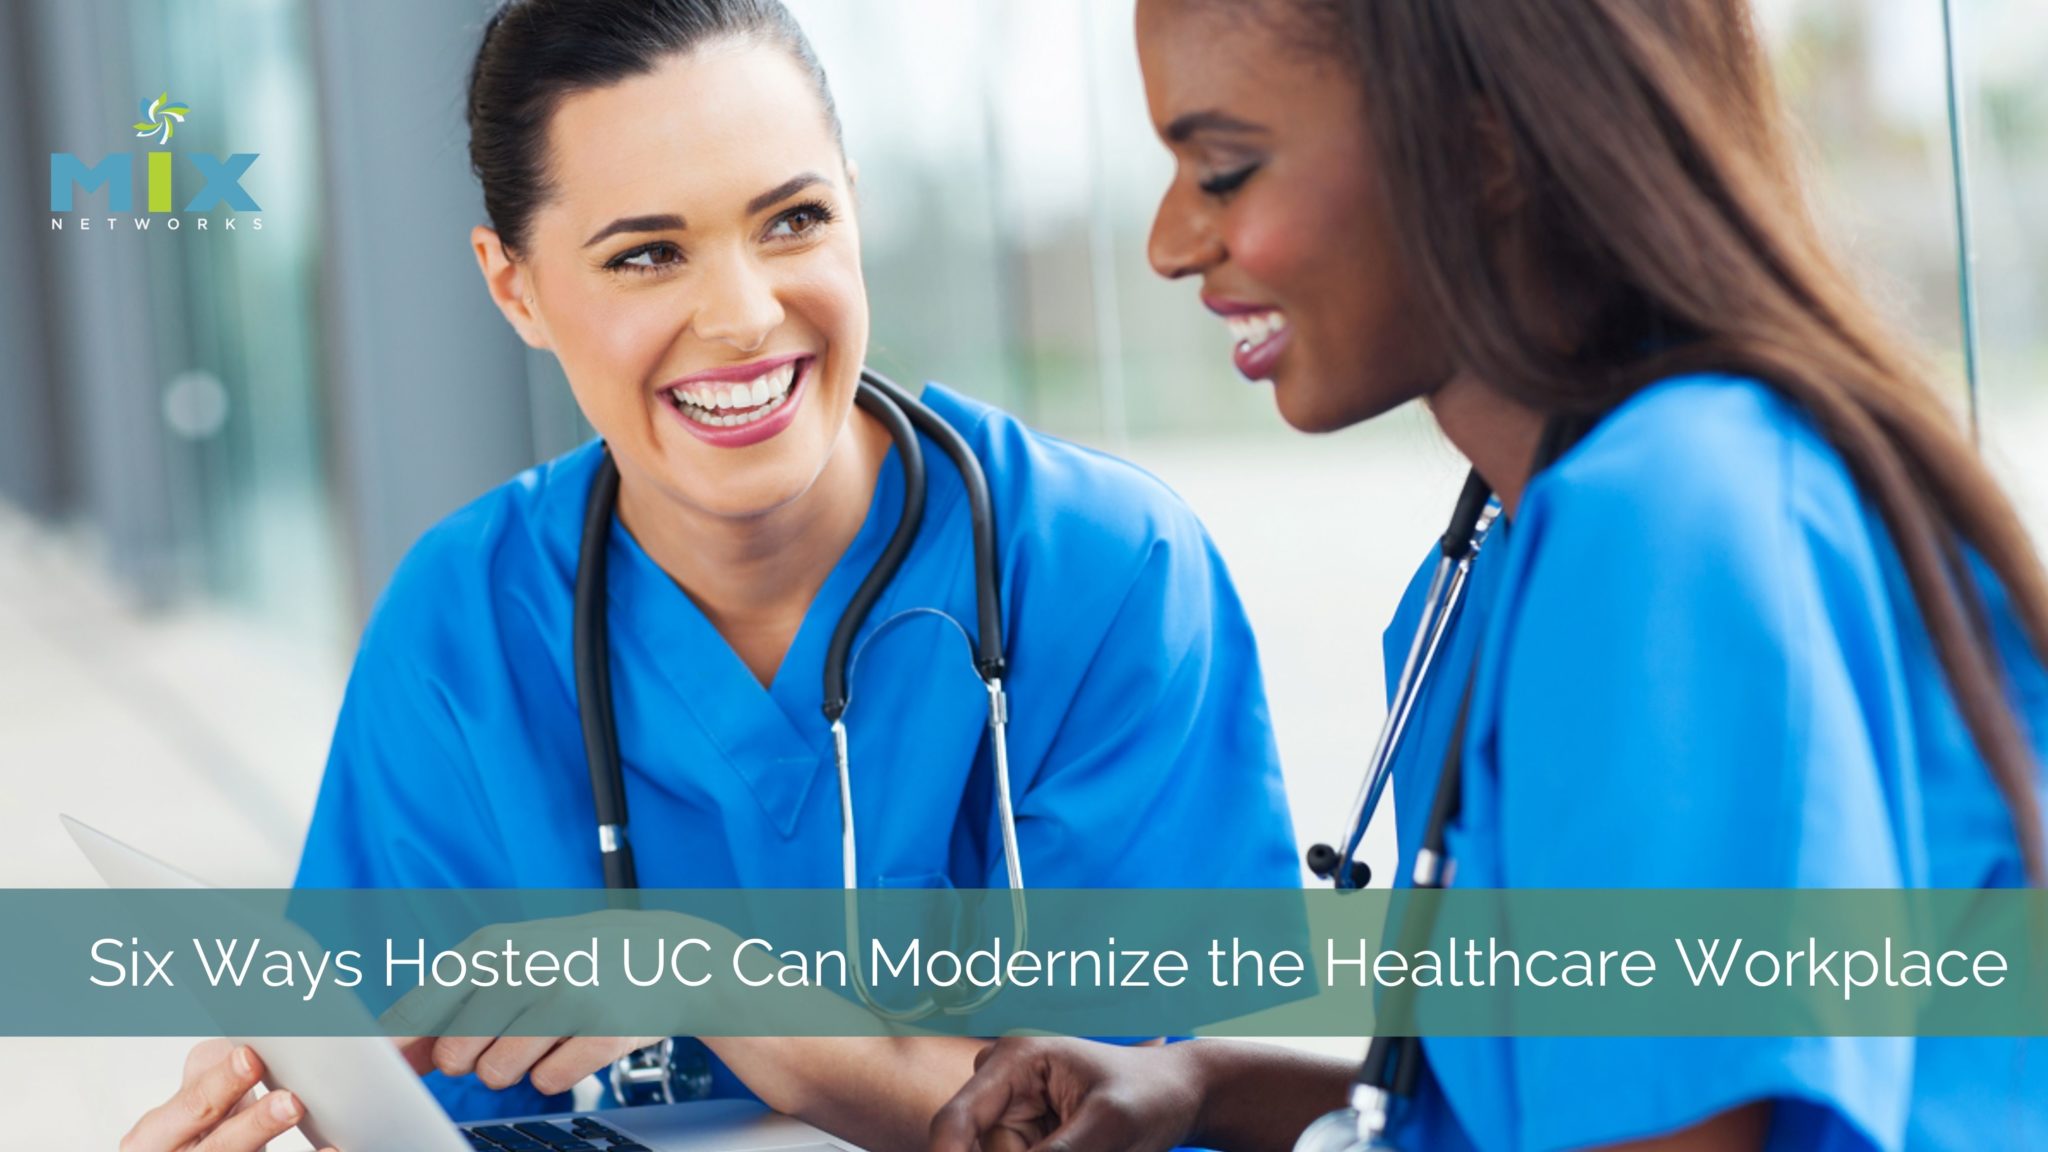 Hosted UC Modernizes Healthcare Workplace